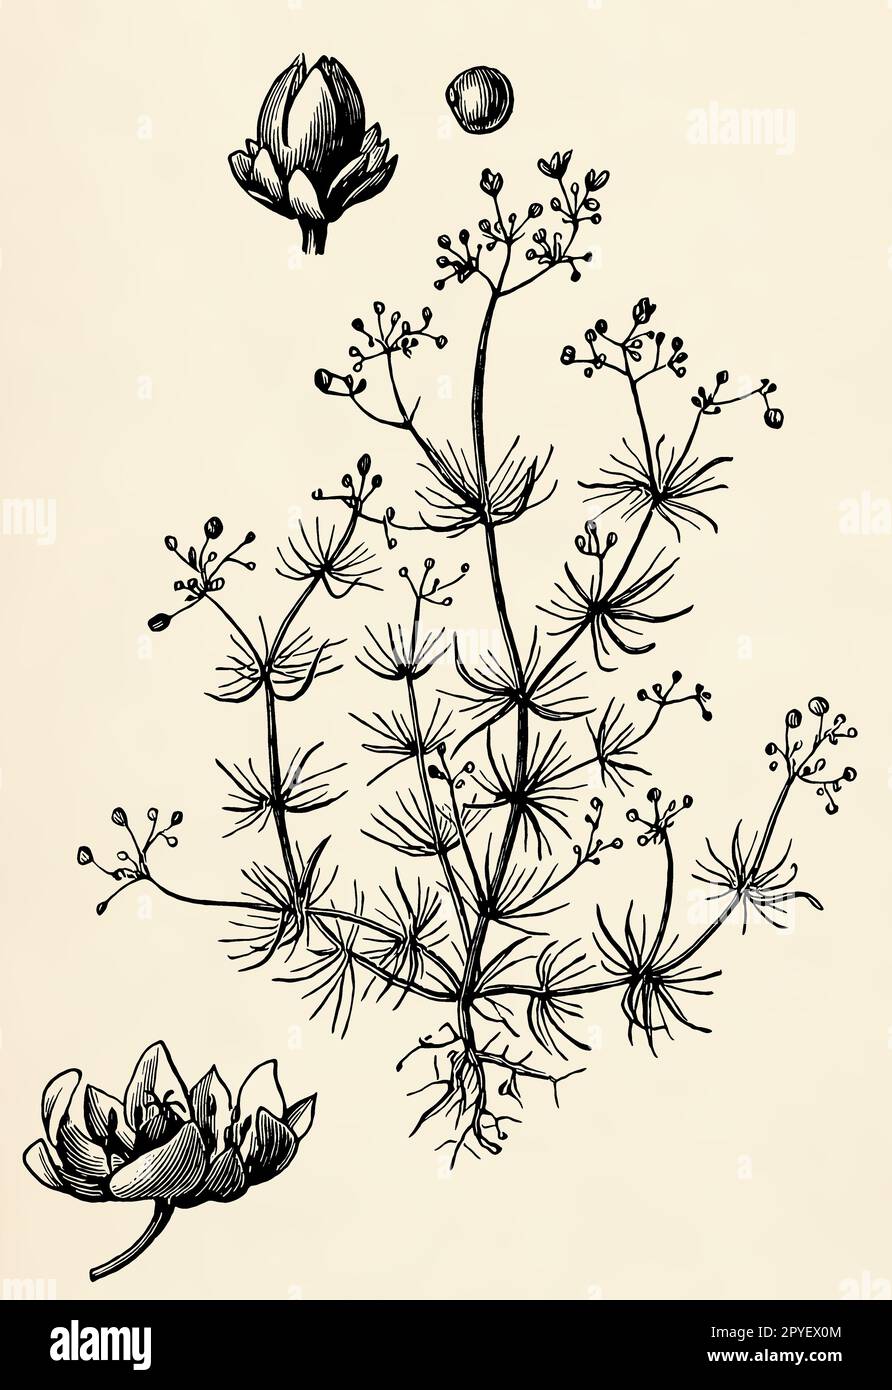 Root system, stem, flowers and fruits of Spergula arvensis. Antique stylized illustration. Stock Photo